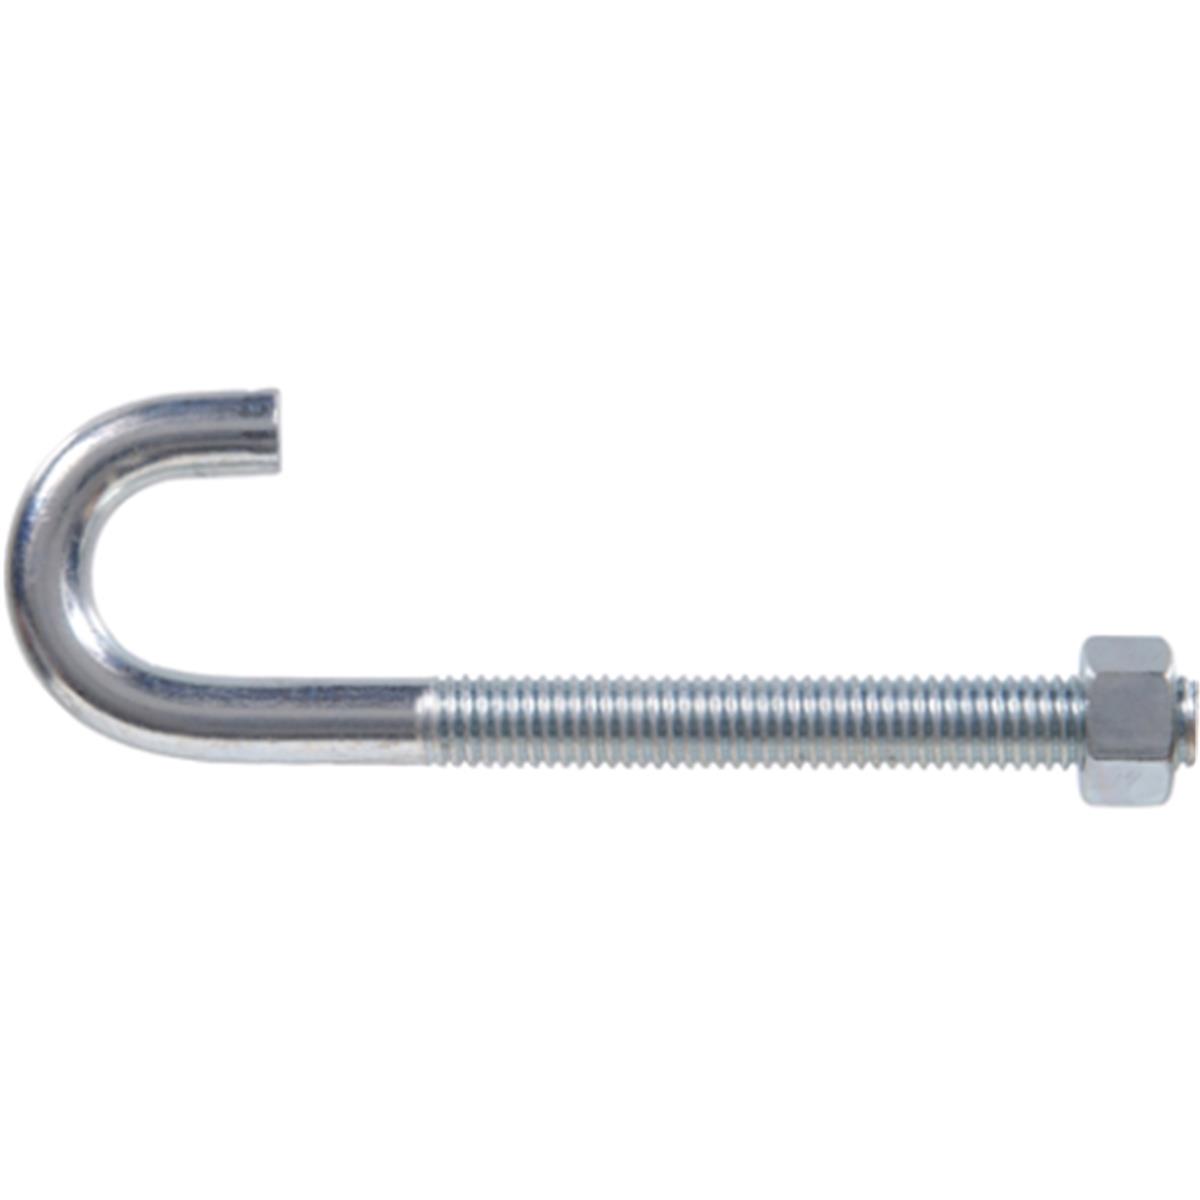 0.31 X 7 In. Zinc Plated J-bolt, Pack Of 10